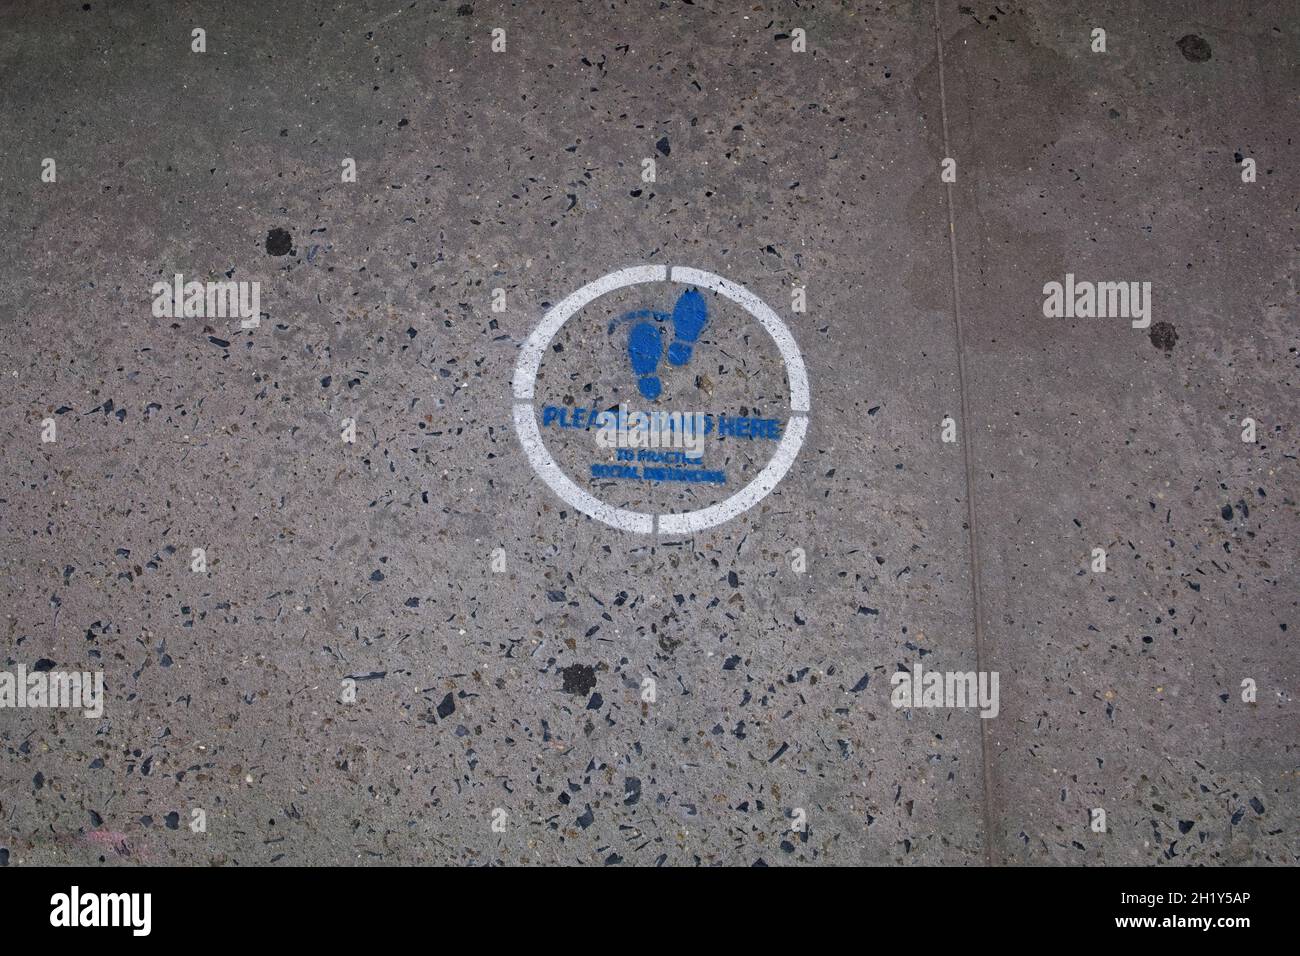 Sidewalk logo to request crowds practice social distancing Stock Photo